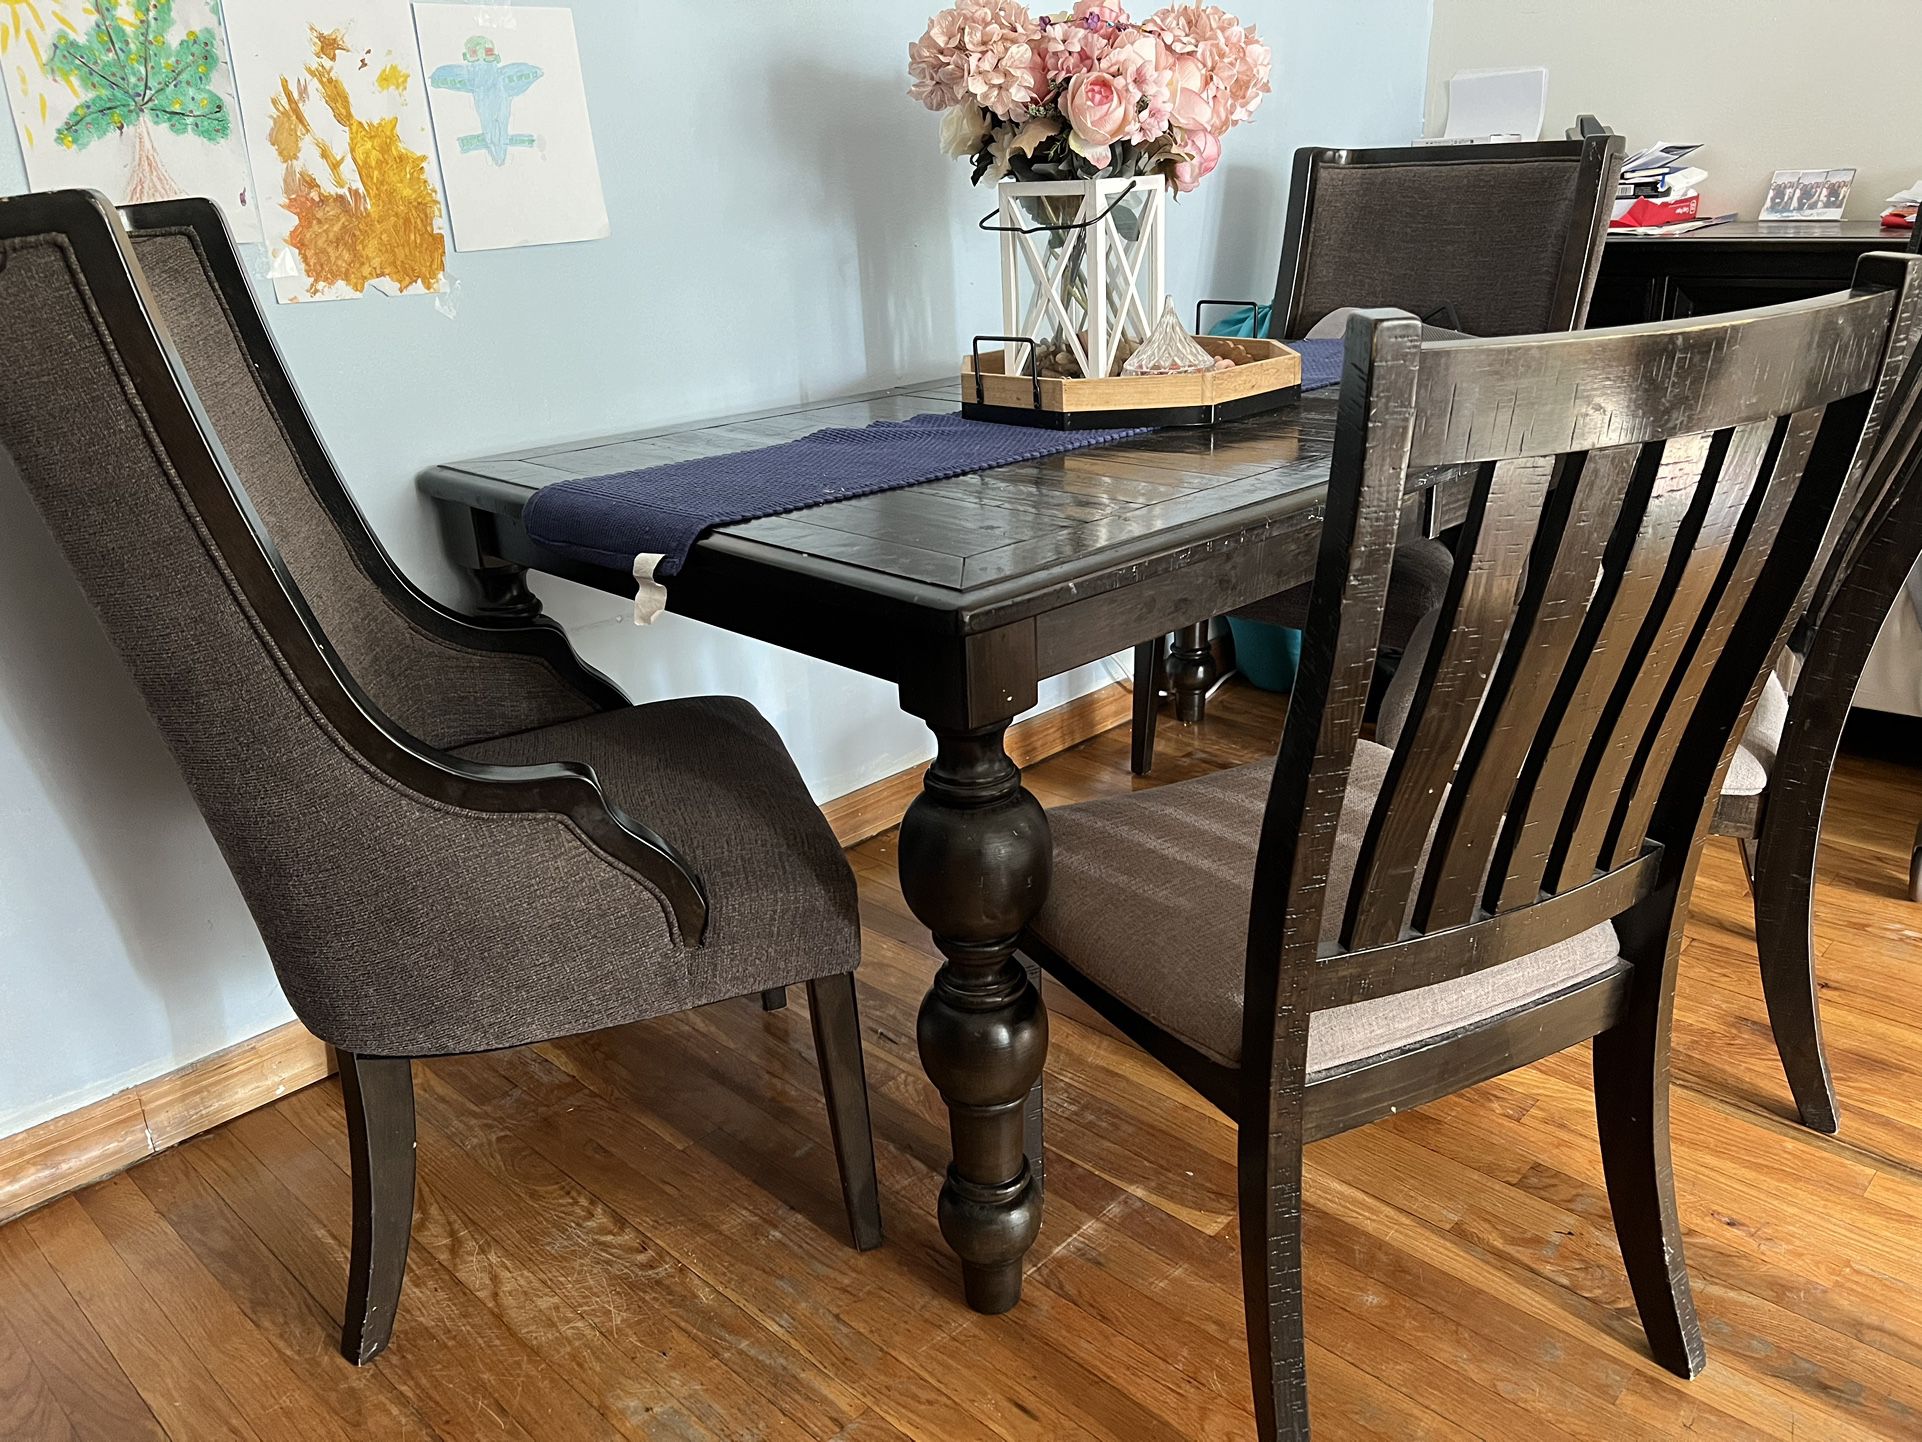 Dining Set, 4 Chairs, Bench, Table Extends 